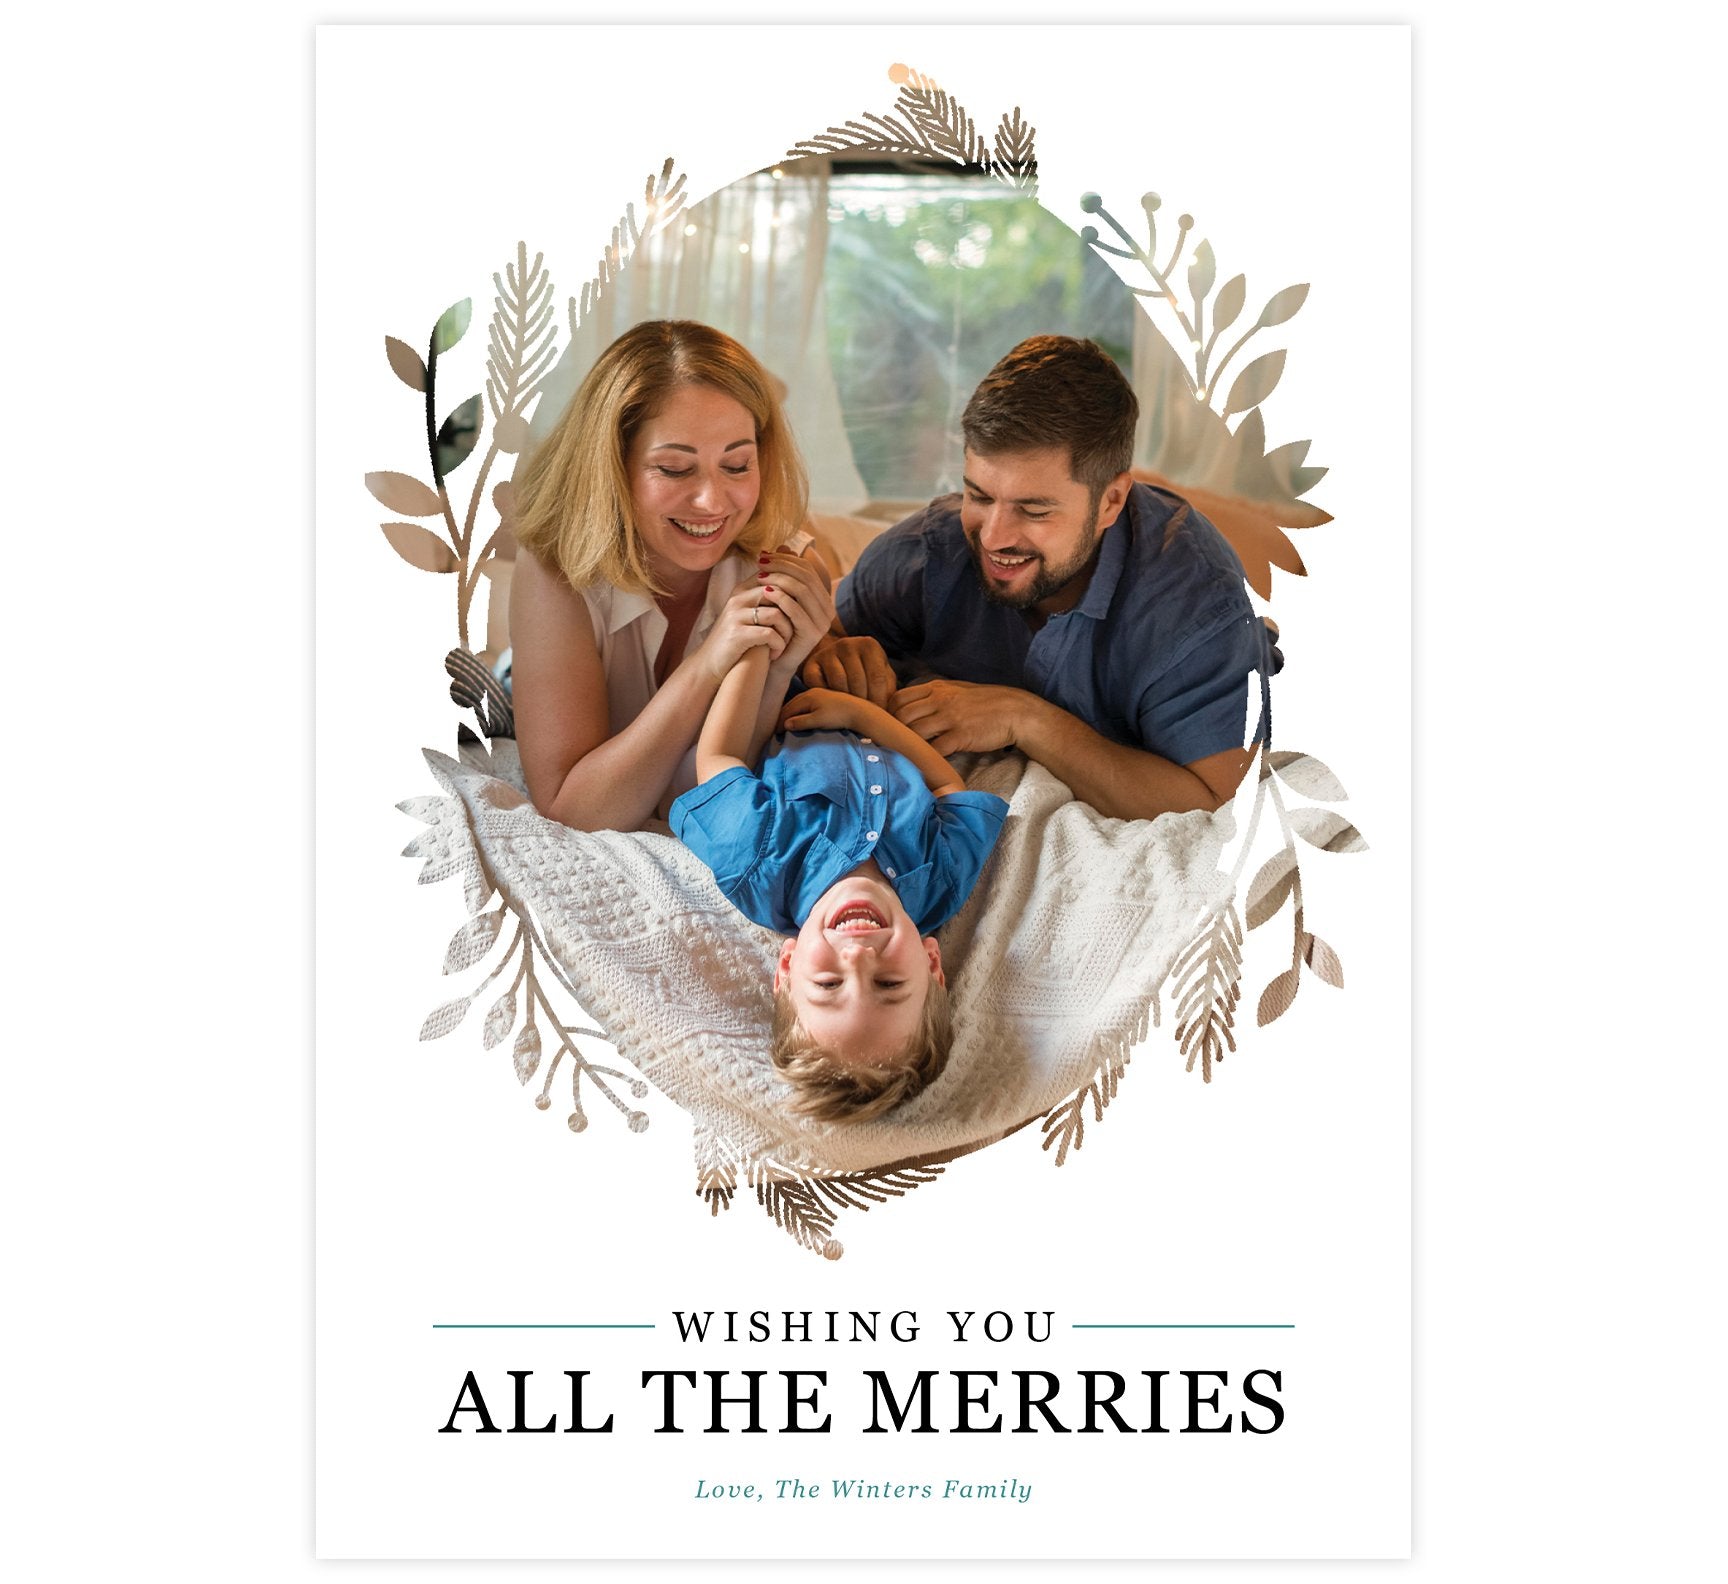 All the Merries Holiday Card; White background with large image in the middle and wreath design around the edges of the photo. Black text that says "Wishing you all the merries" and teal text with the signature.